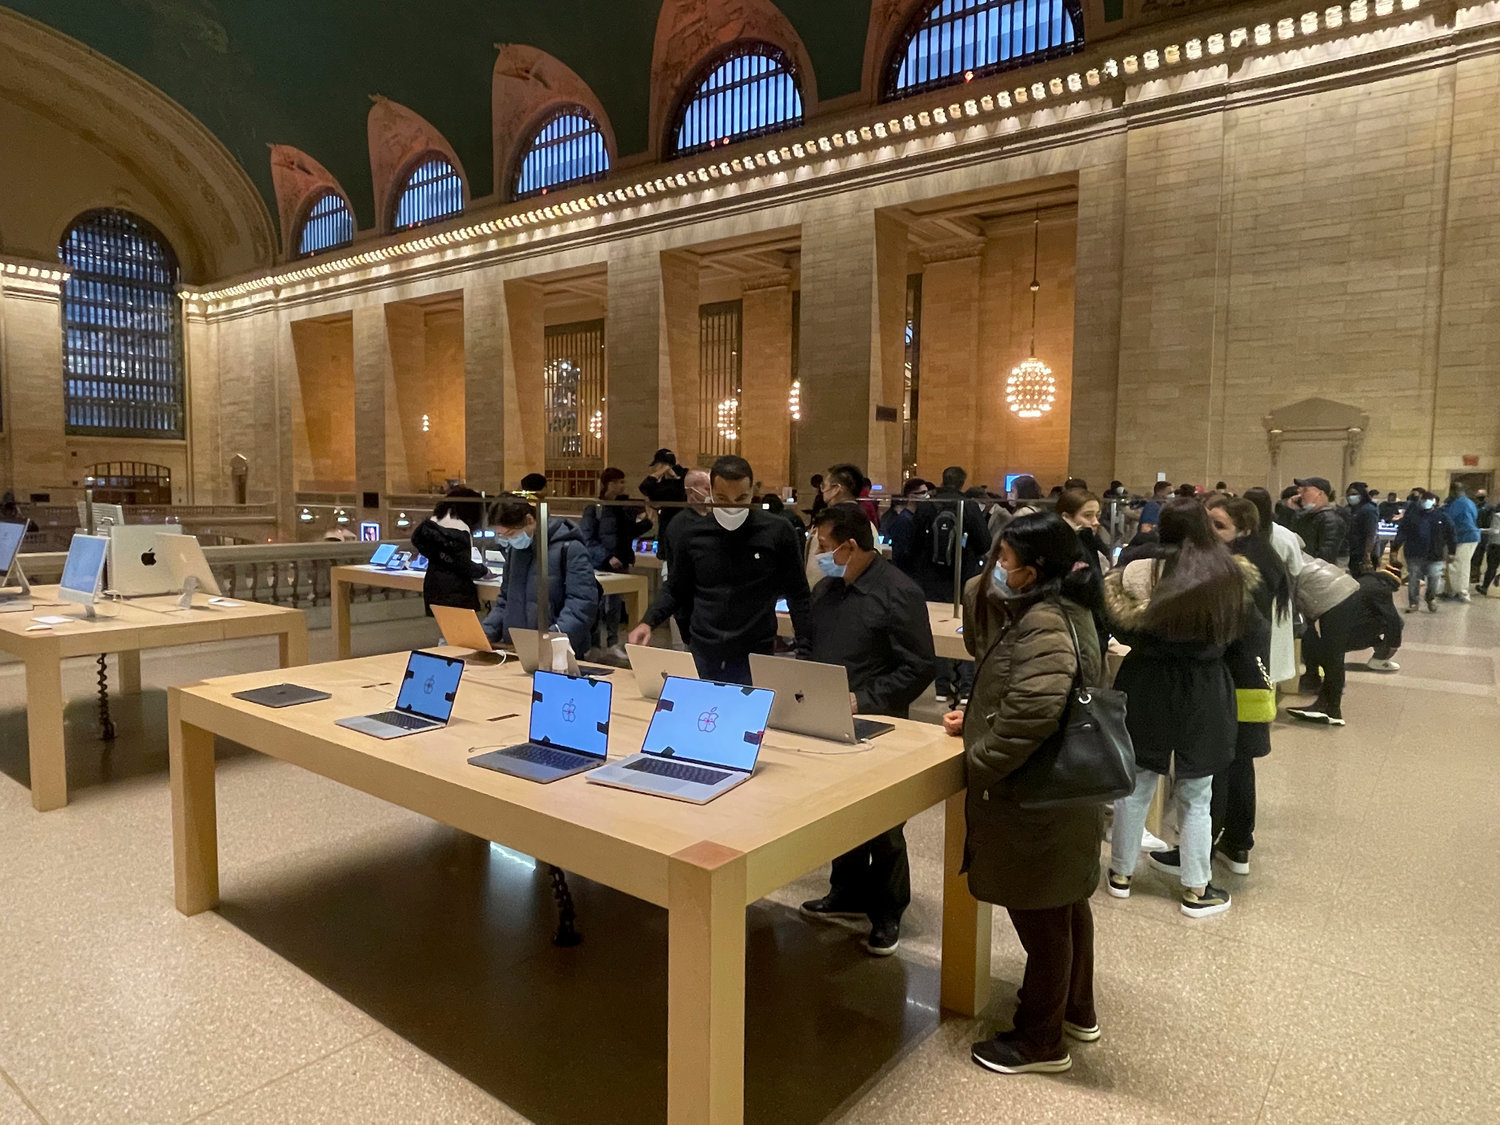 The Apple Store at Grand Central Station in Manhattan on Black Friday last year.